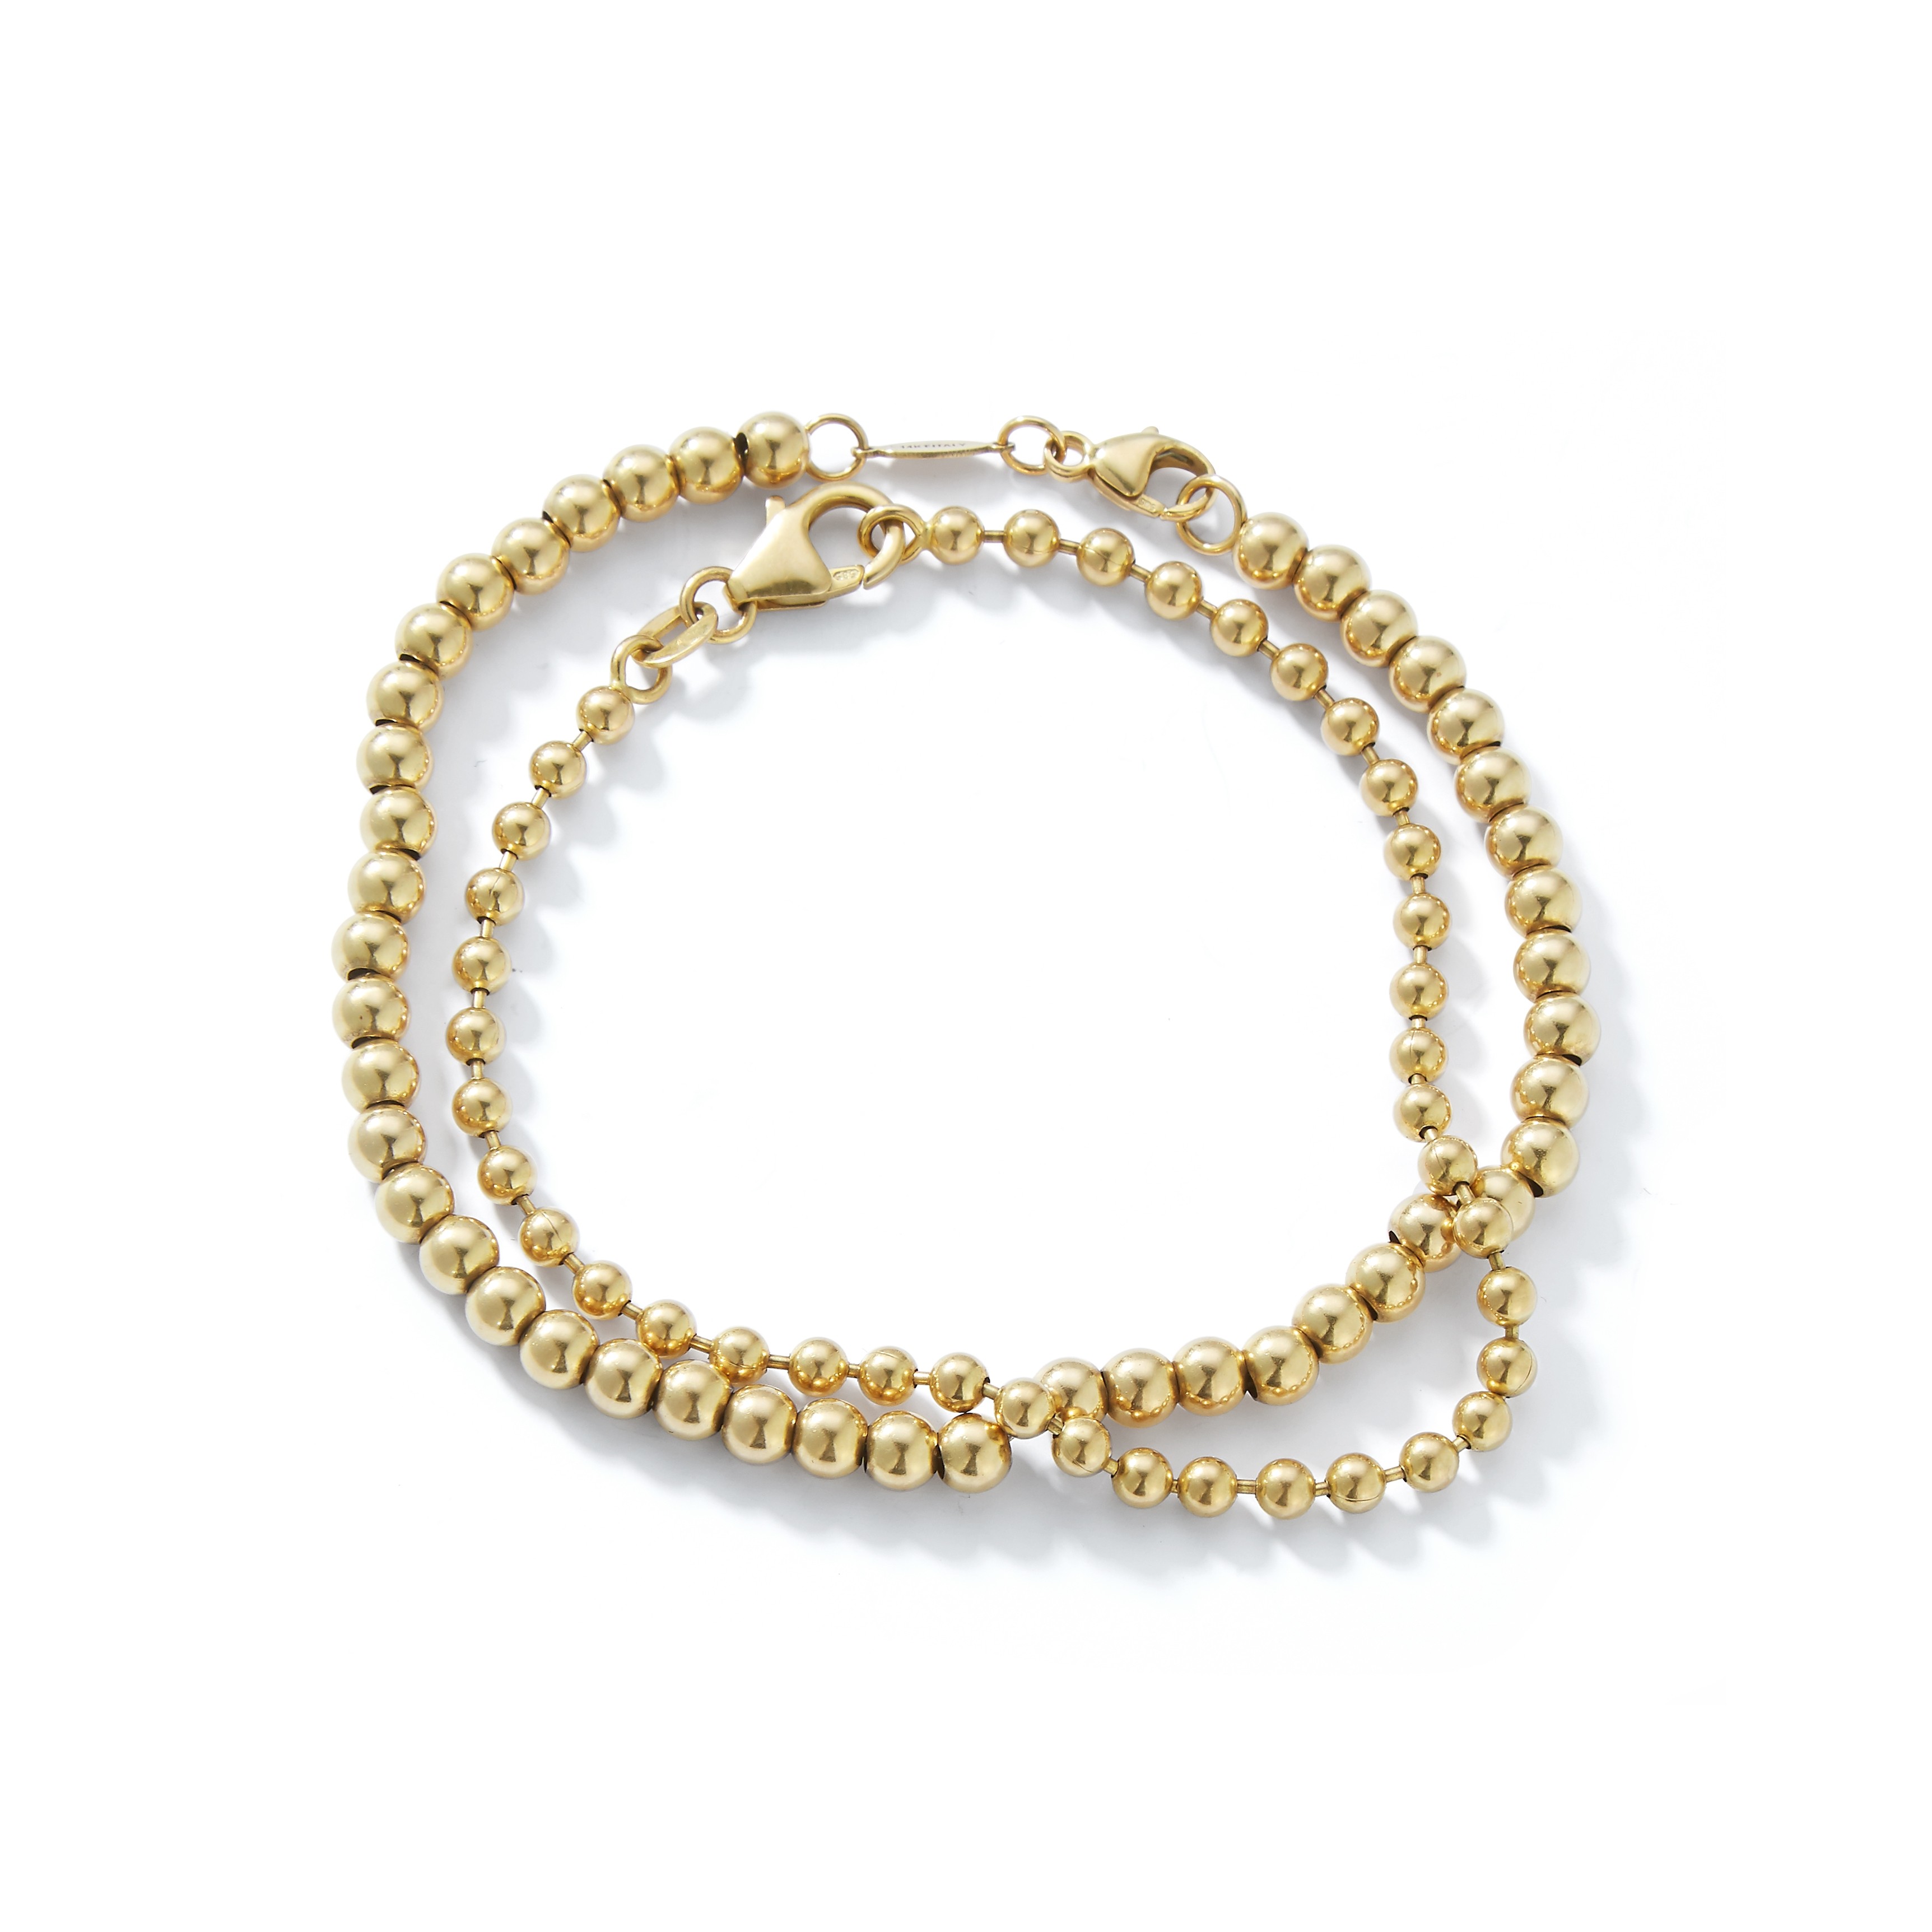 Solid Gold Ball Bracelet - Bracelets - Fine Jewelry - Garland Collection